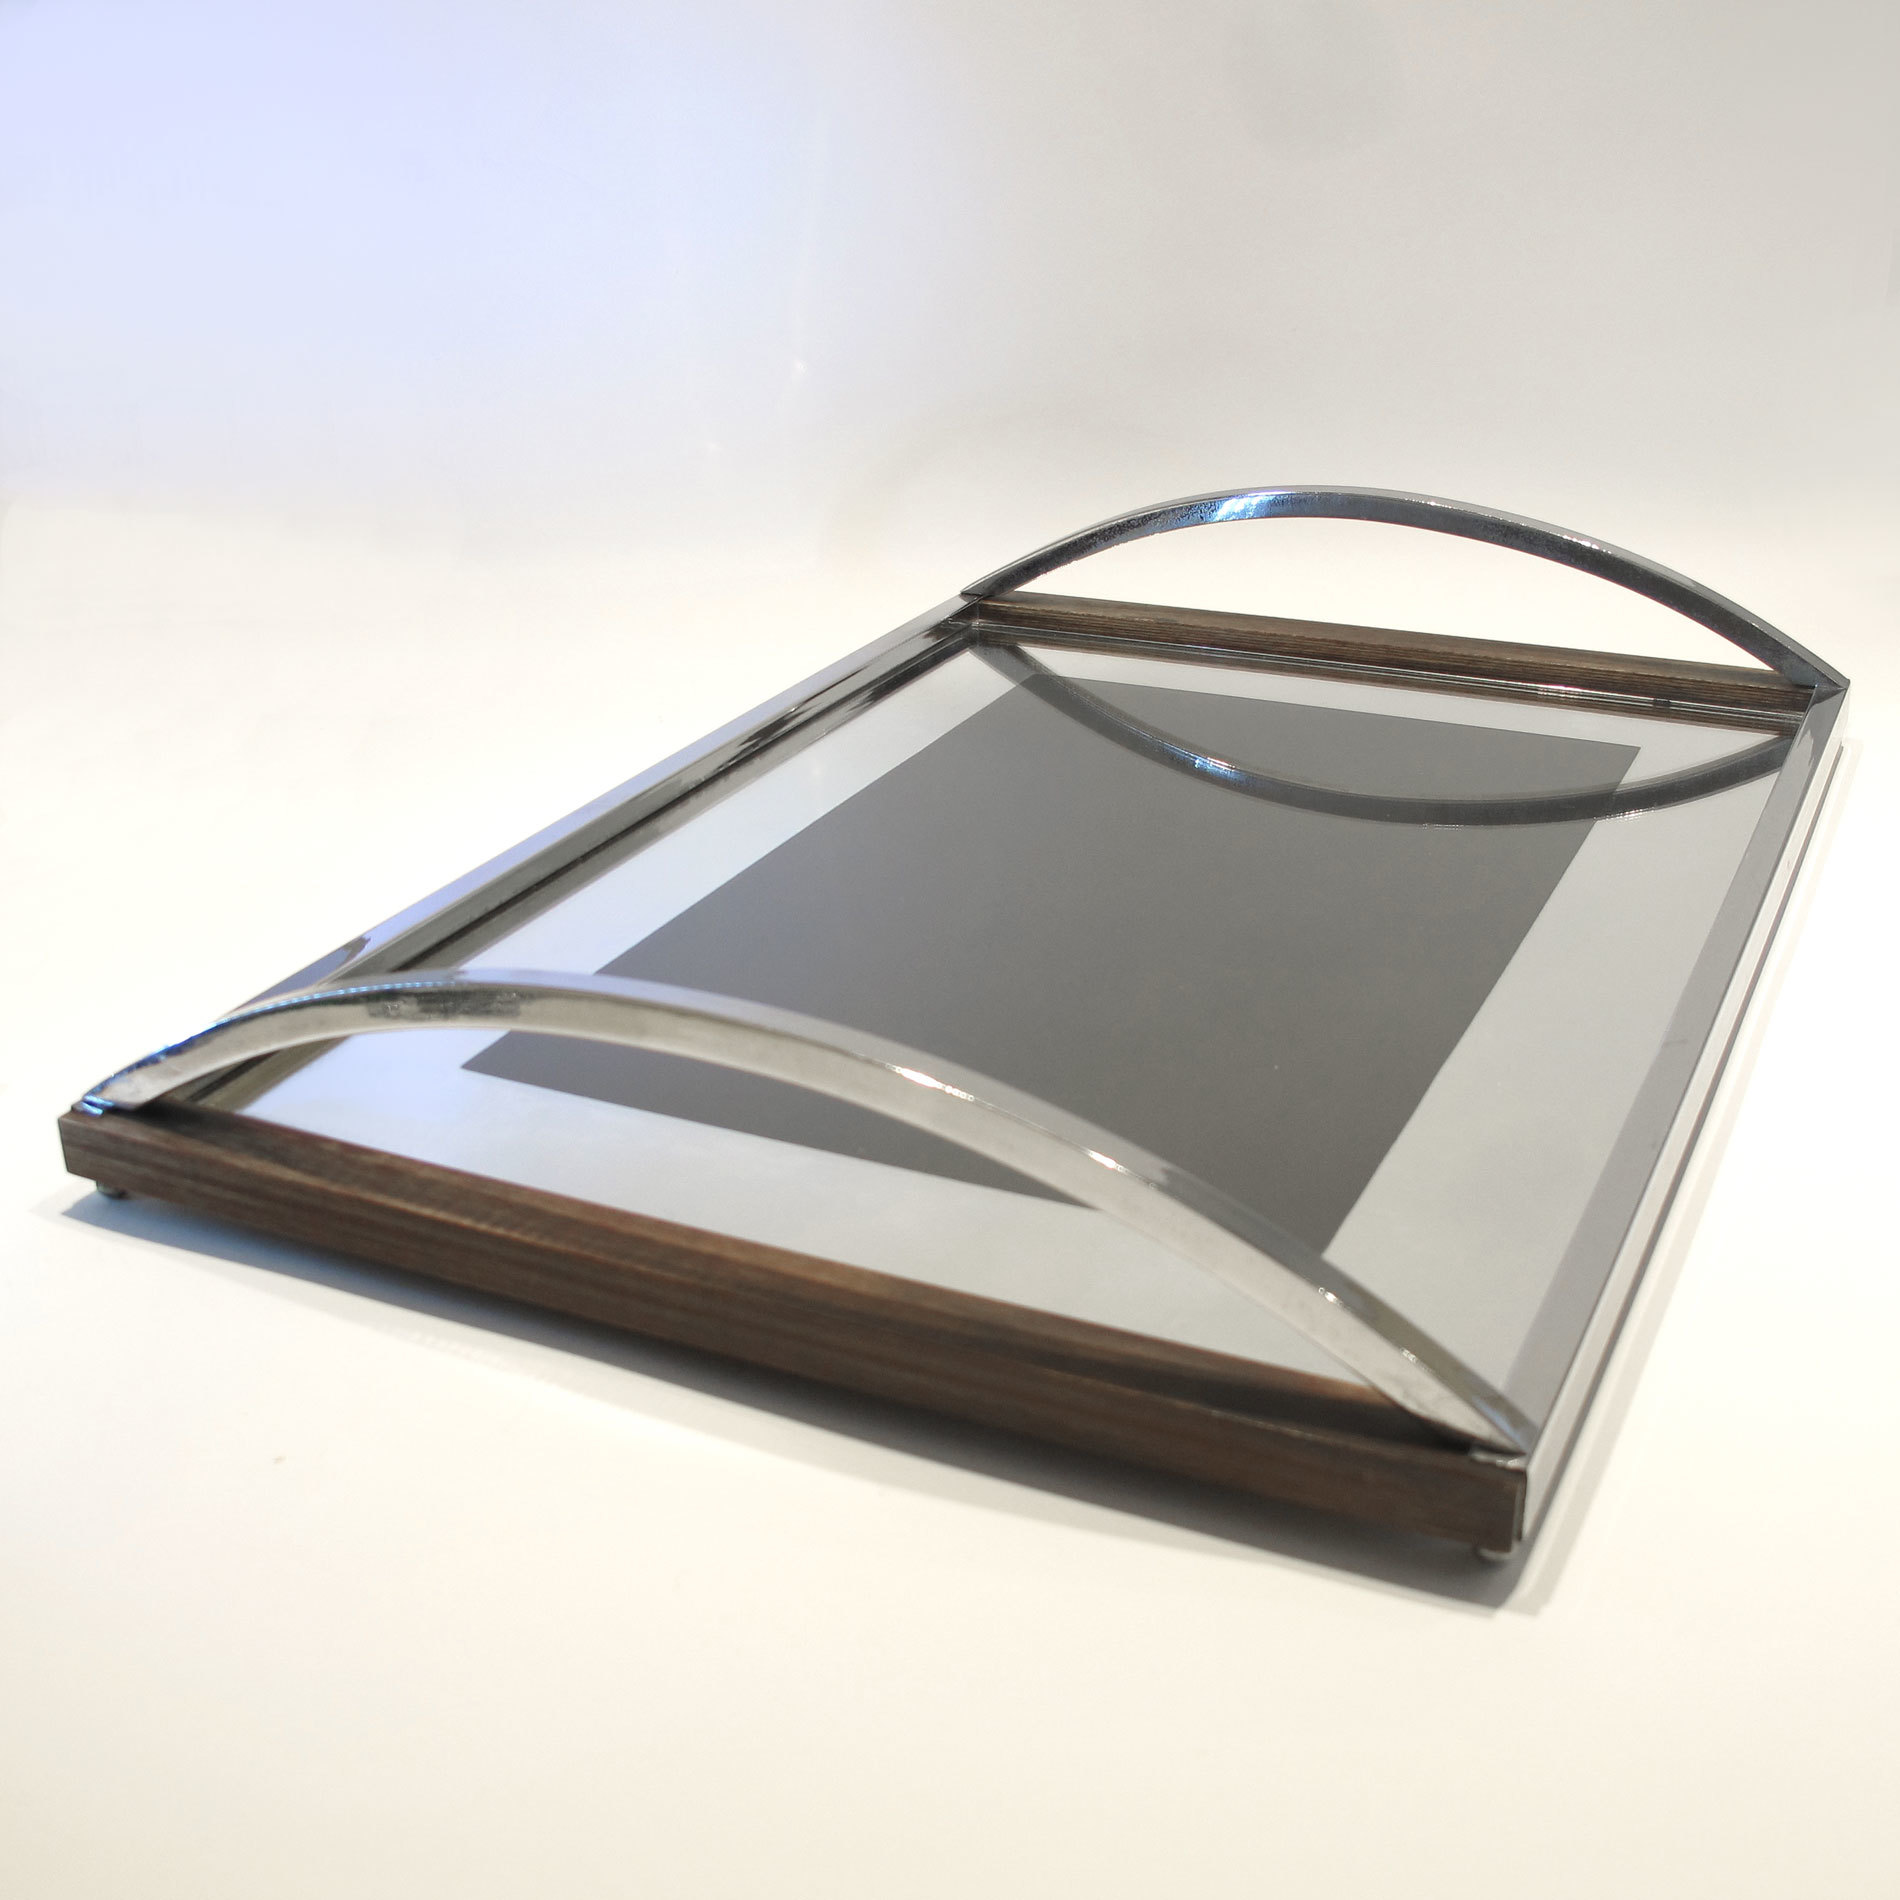 The image for Chrome Wood Tray 01